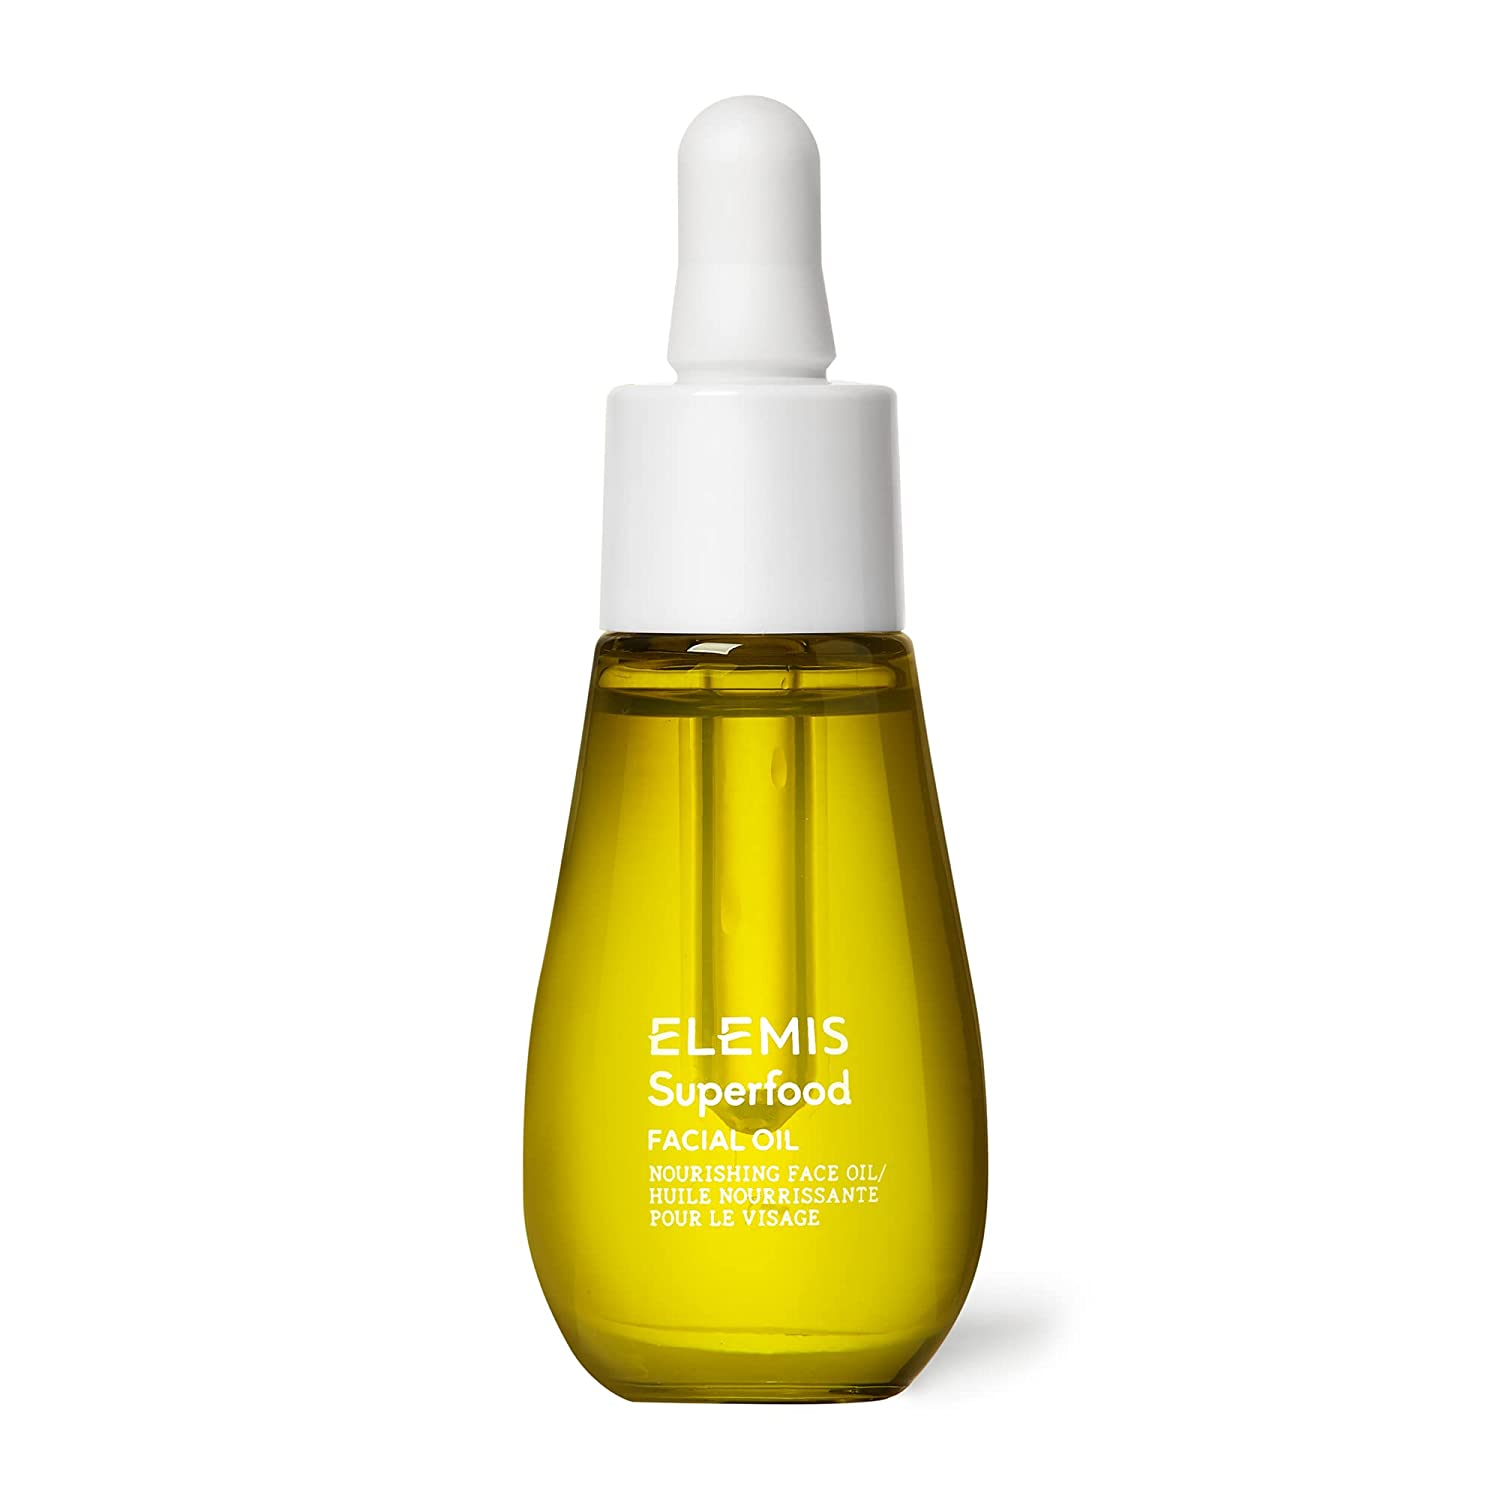 ELEMIS Superfood Lightweight Non-Greasy Face Oil